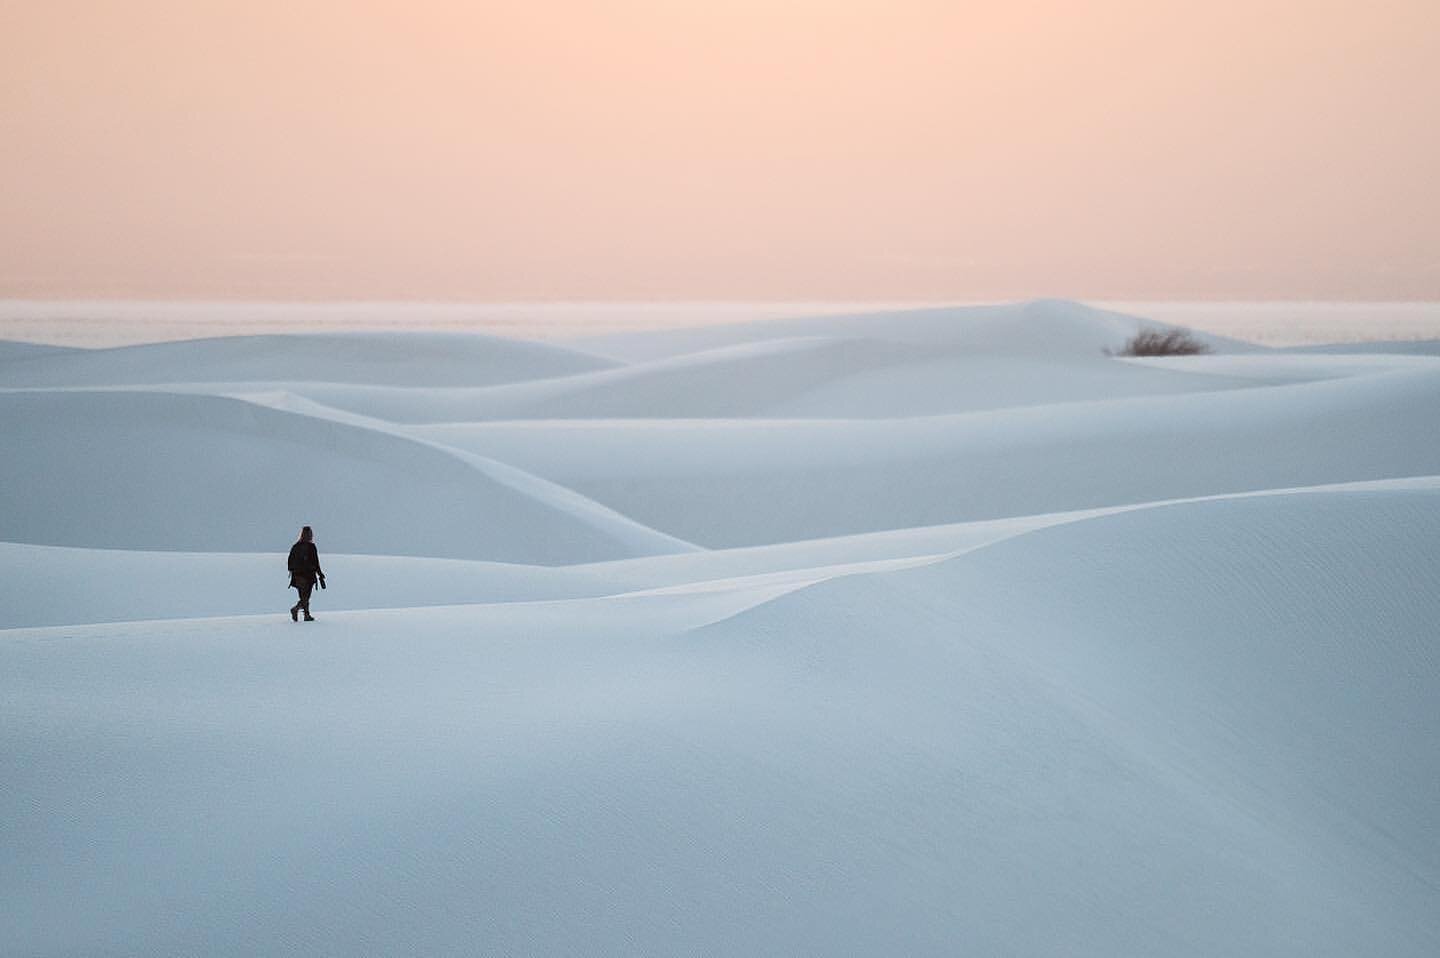 &ldquo;A lone photographer strolls into the frame during sunset at White Sands National Park. These expansive gypsum sand dunes are a telephoto lens paradise and I had a blast photographing small scenes such as this.&rdquo; #slowphotographymovement
&